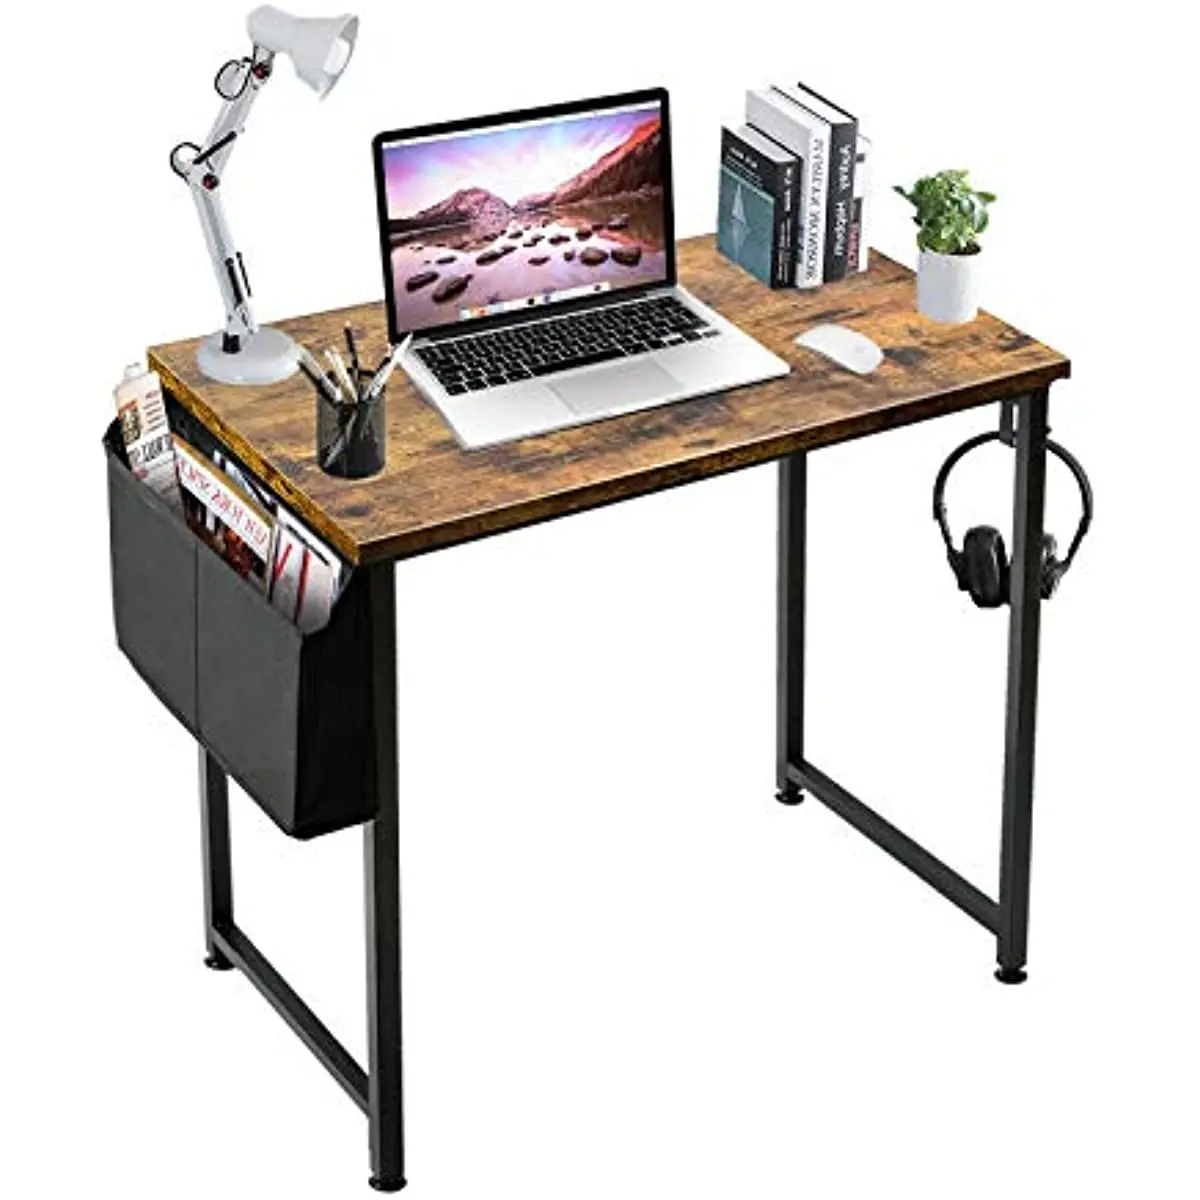 

LUFEIYA Small Computer Desk Study Table for Small Spaces Home Office 31 Inch Rustic Student Laptop PC Writing Desks